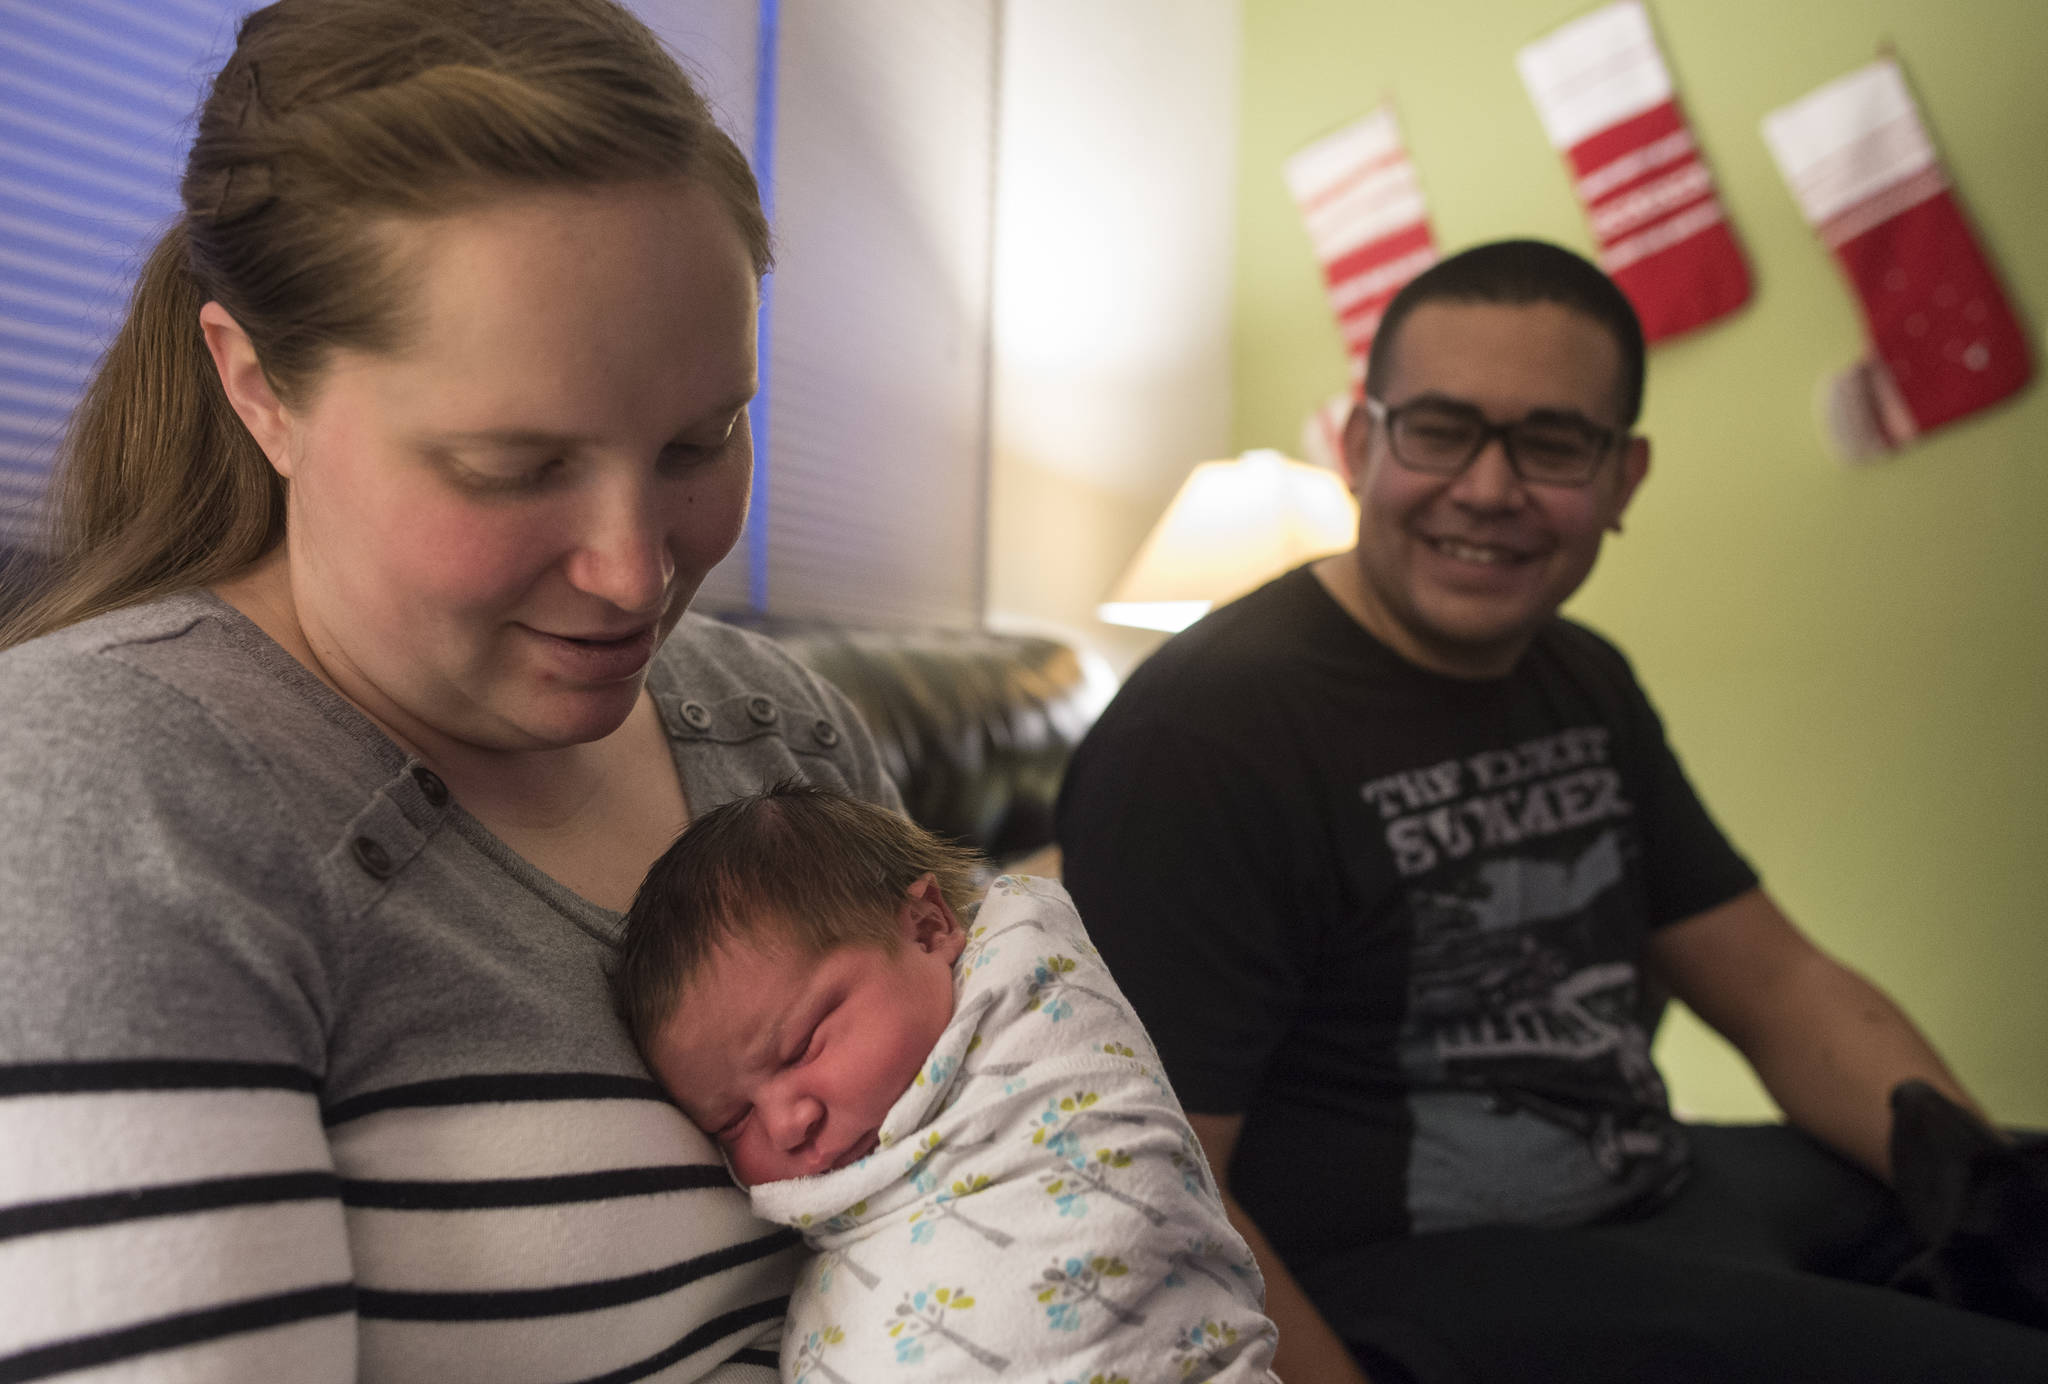 Christine and Dominique Johnson with their new daughter, Adelaide Olivia, at their Mendenhall Valley home on Monday, Jan. 1, 2018. Adelaide was born Monday at 12:27 a.m. at the Juneau Birth Center. (Michael Penn | Juneau Empire)  Christine and Dominique Johnson with their new daughter, Adelaide Olivia, at their Mendenhall Valley home on Monday, Jan. 1, 2018. Adelaide was born Monday at 12:27 a.m. at the Juneau Birth Center. (Michael Penn | Juneau Empire)